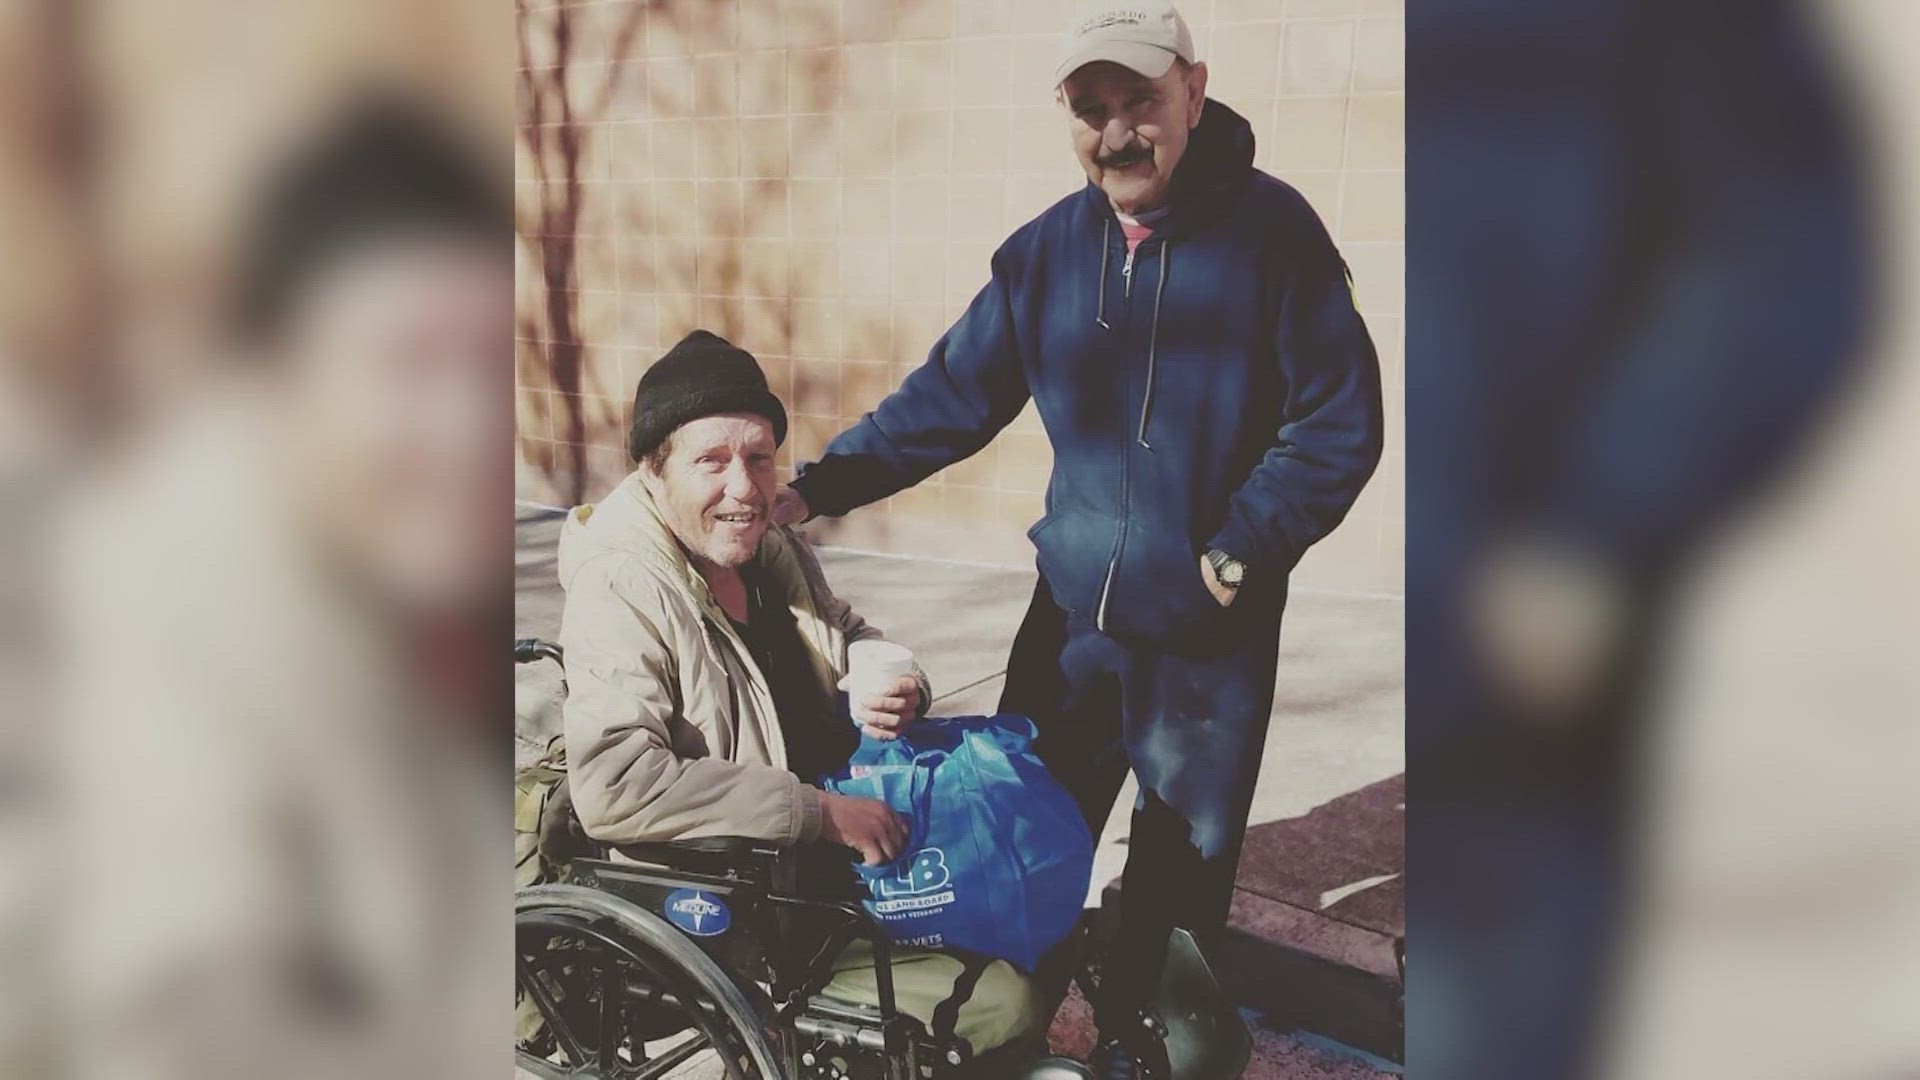 Fred Alvarado founded Broken Warriors Angels to help as many homeless veterans as possible.